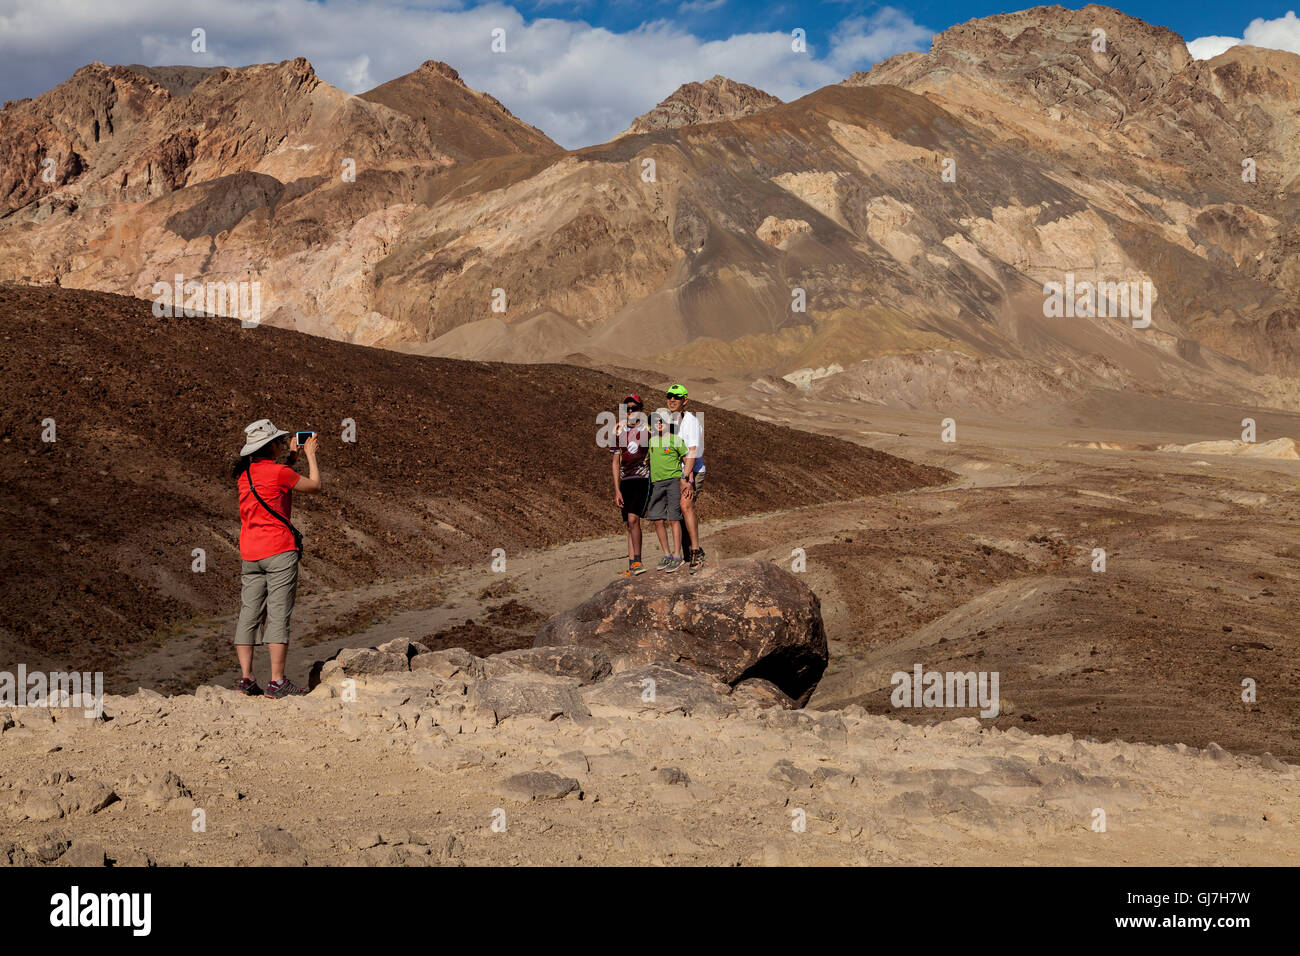 Woman taking pictures of family at the volcanic and sedimentary hills near Artist's Palette in Death Valley National Park, Calif Stock Photo